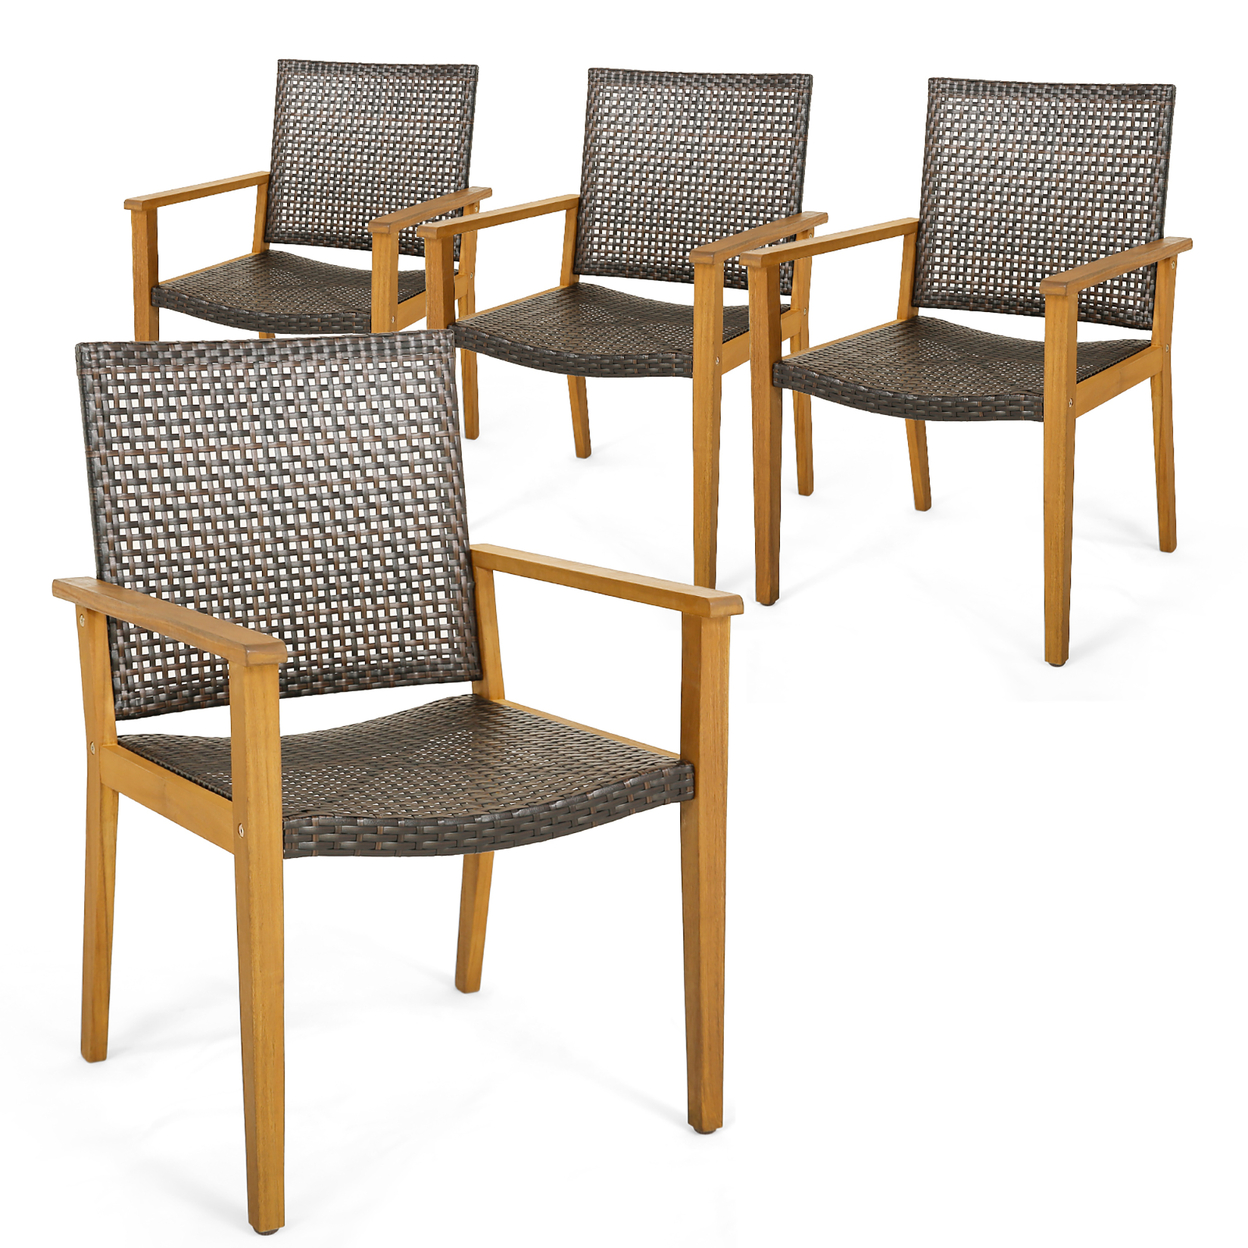 Outdoor Rattan Chair Set Of 4 Patio PE Wicker Dining Chairs W/ Sturdy Acacia Wood Frame